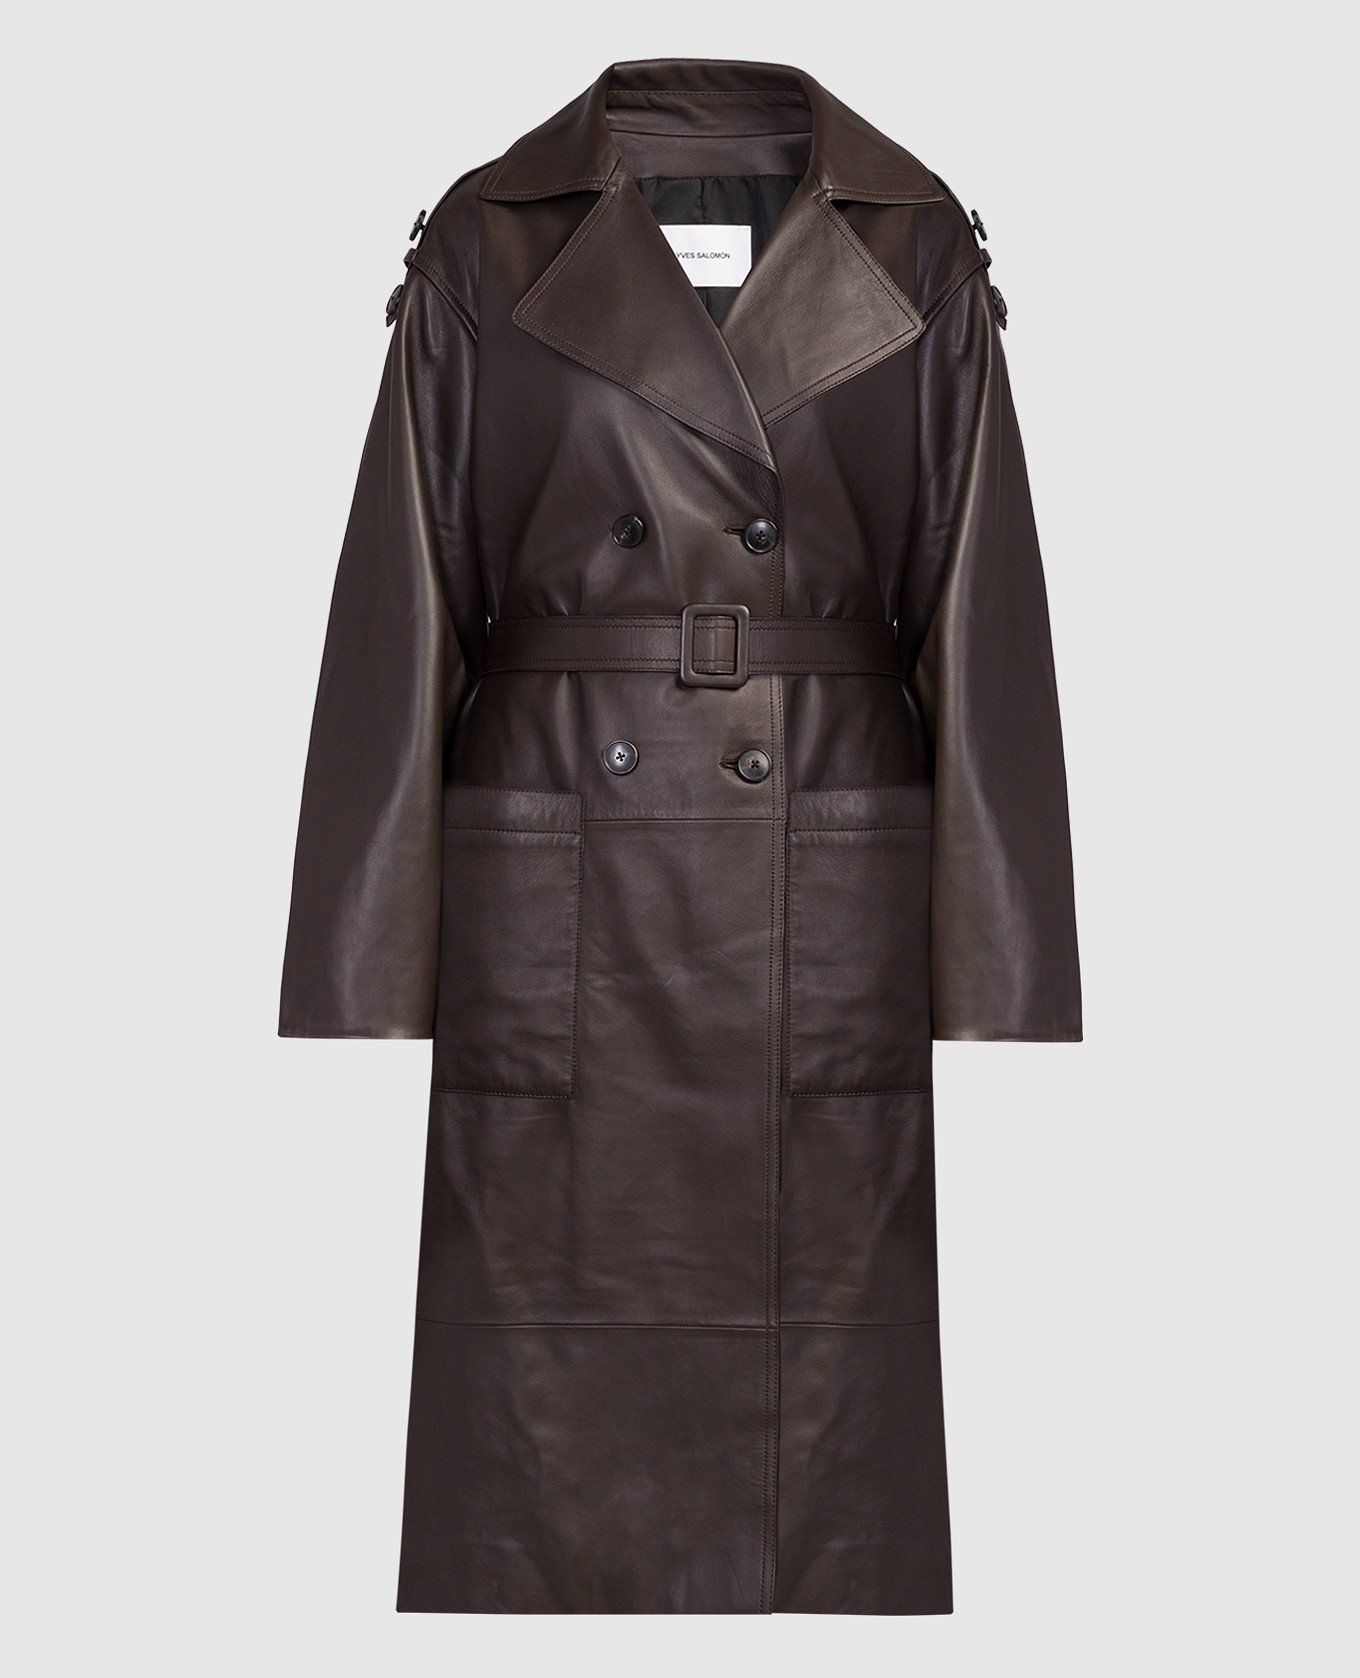 Brown double-breasted leather trench coat